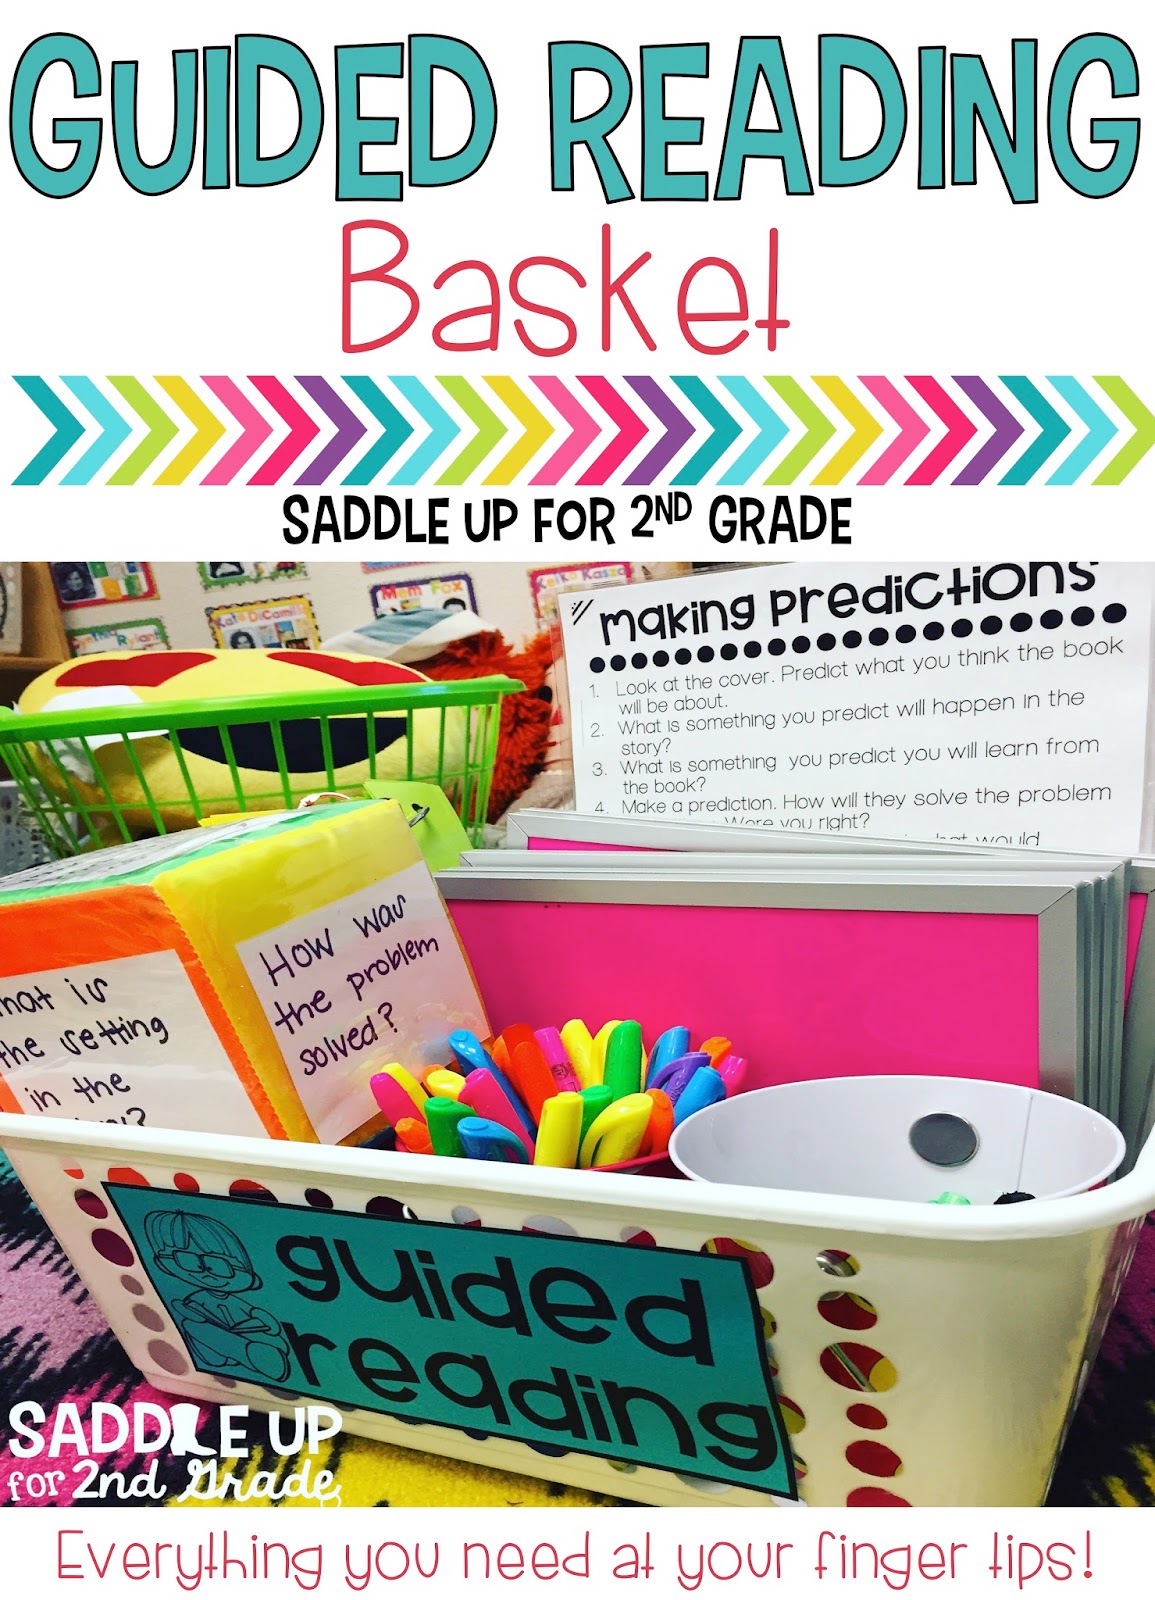 This basket contains everything I need for guided reading. It includes comprehension stems, dry erase boards, finger light beams and so much more. Come read all about it and grab a FREE printable label too! 